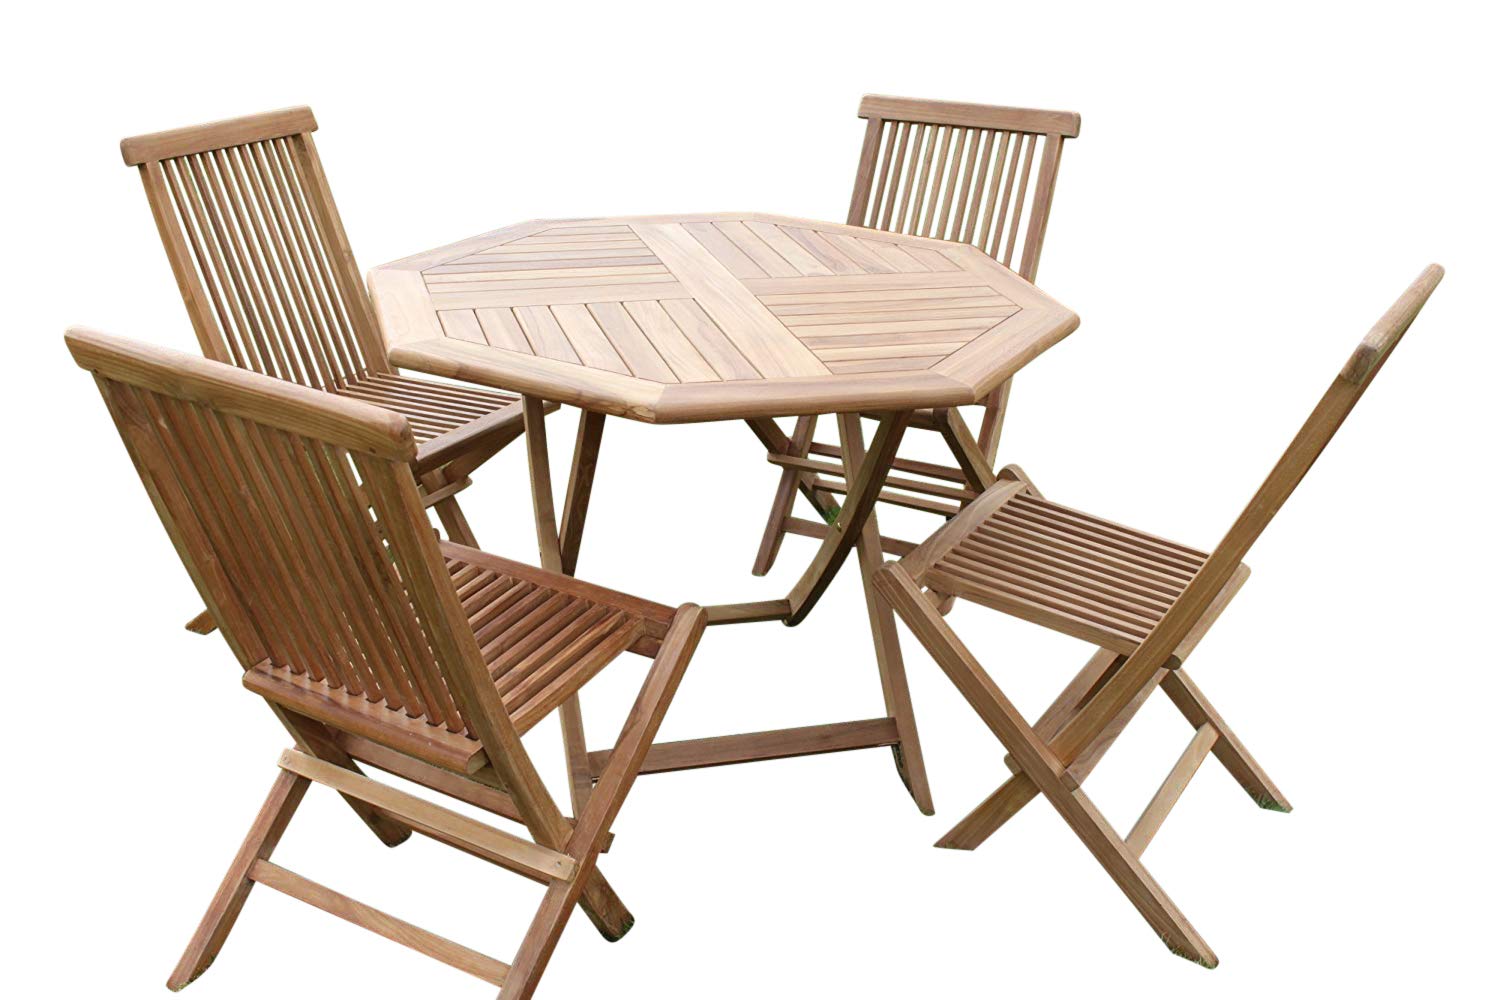 Solid Teak Octagonal Garden Dining, Folding Garden Chairs And Table Set